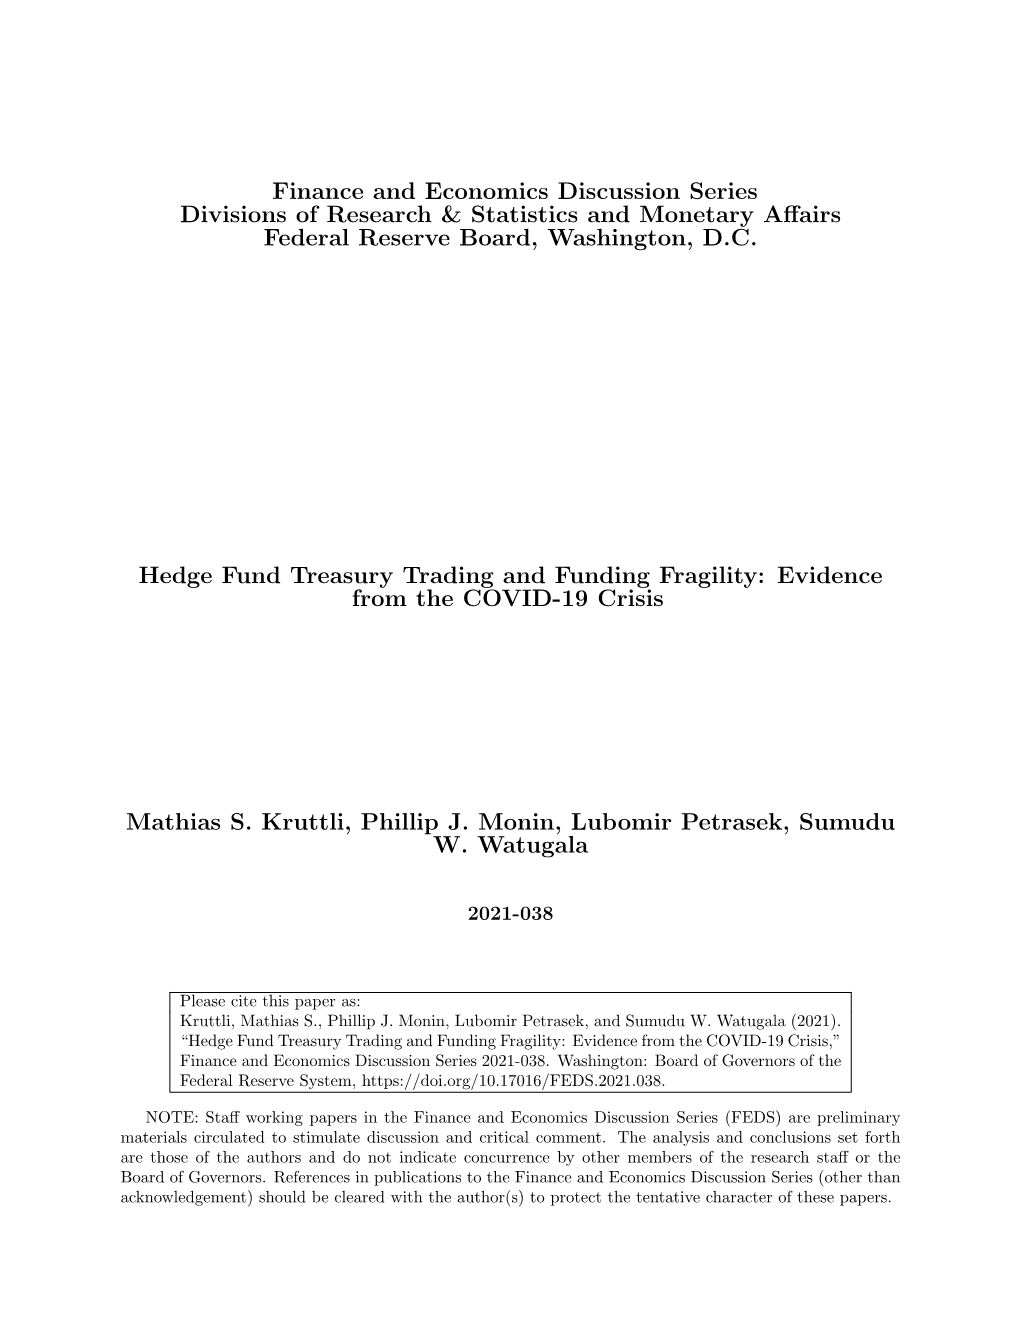 Hedge Fund Treasury Trading and Funding Fragility: Evidence from the COVID-19 Crisis